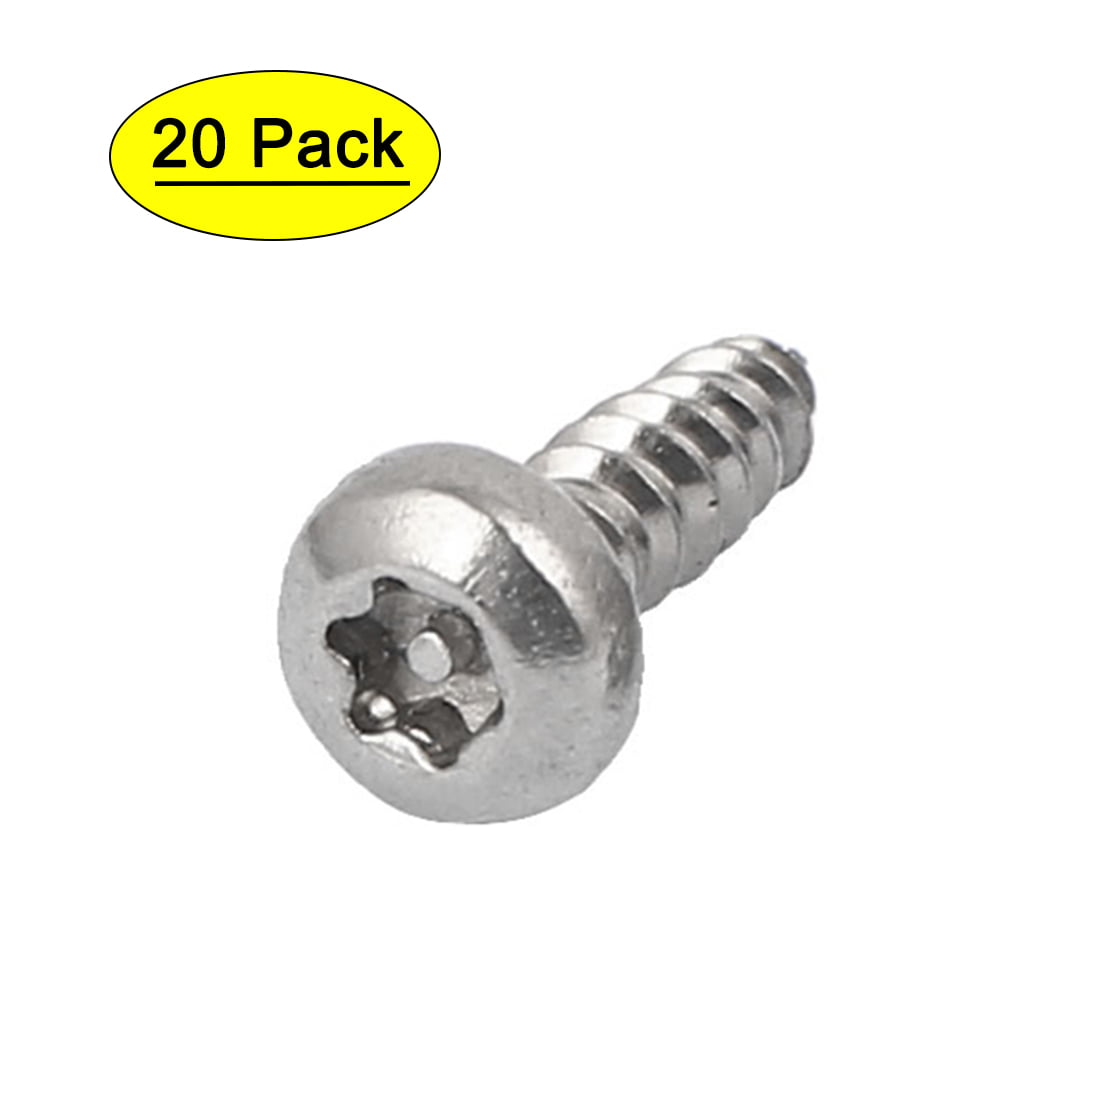 #4 M2.9x19mm Stainless Steel Phillips Round Pan Head Self Tapping Screws 50pcs 